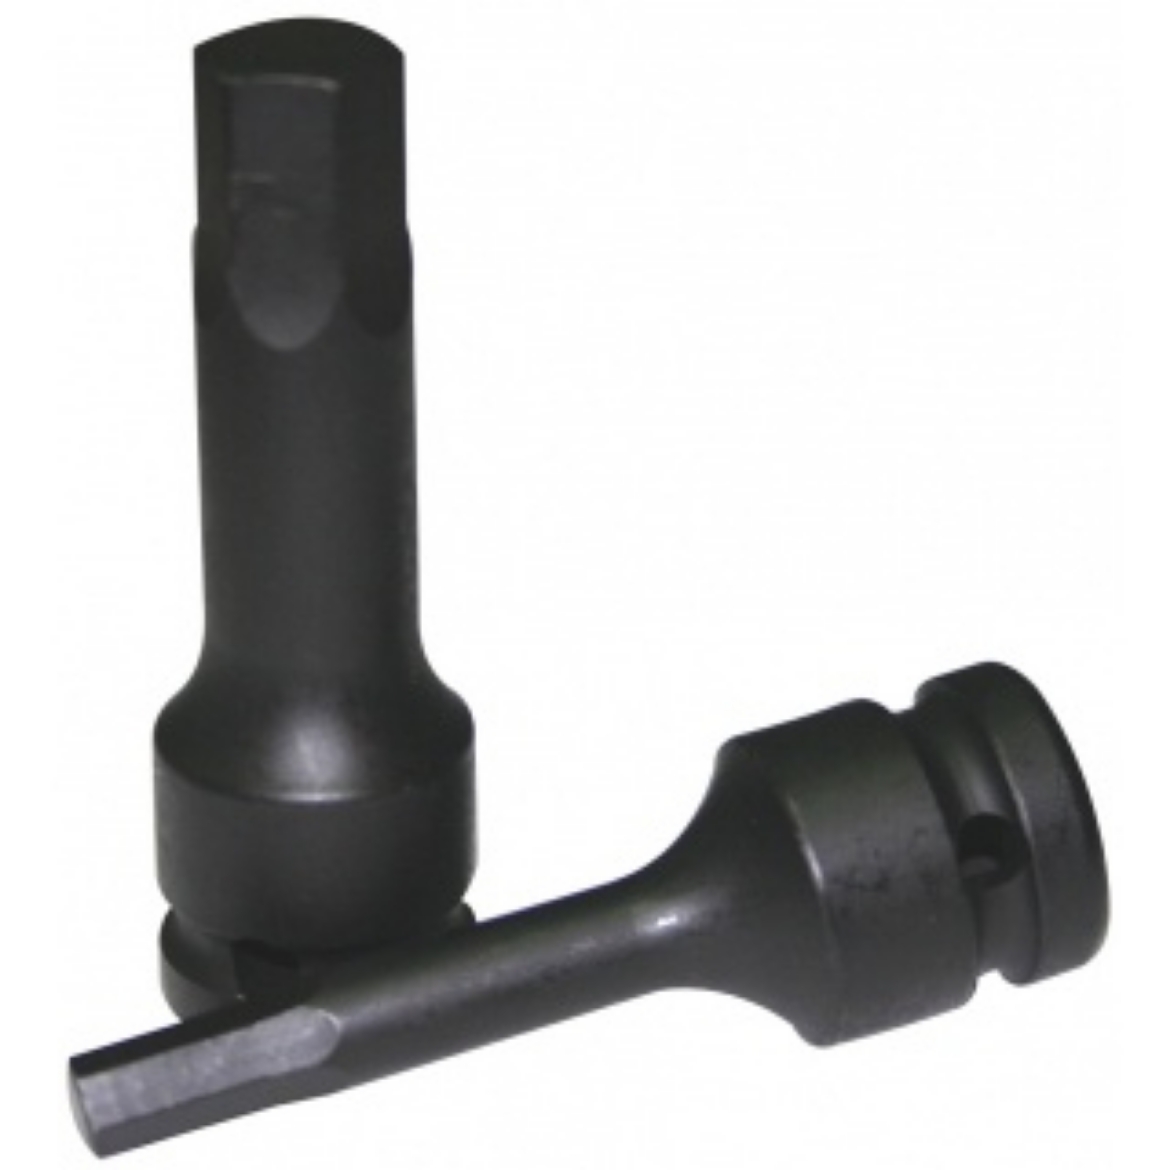 Picture of SOCKET IMPACT 1/2"DR INHEX METRIC 19MM SP TOOLS